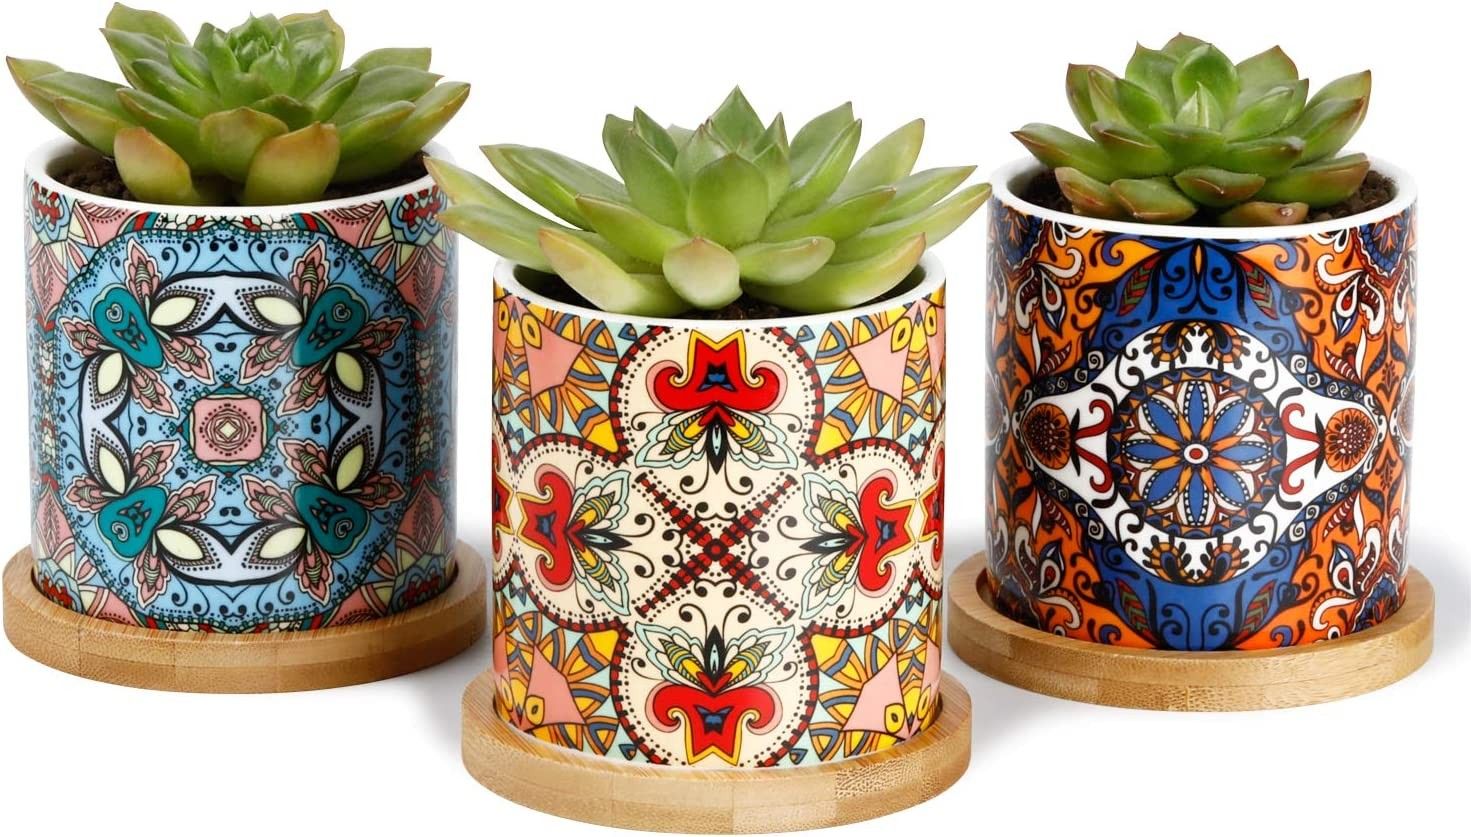 Greenaholics Succulent Pots - 3 Inch Ceramic Plant Pots with Bamboo Trays, Great House and Office Decor, Set of 3, Multi-Color